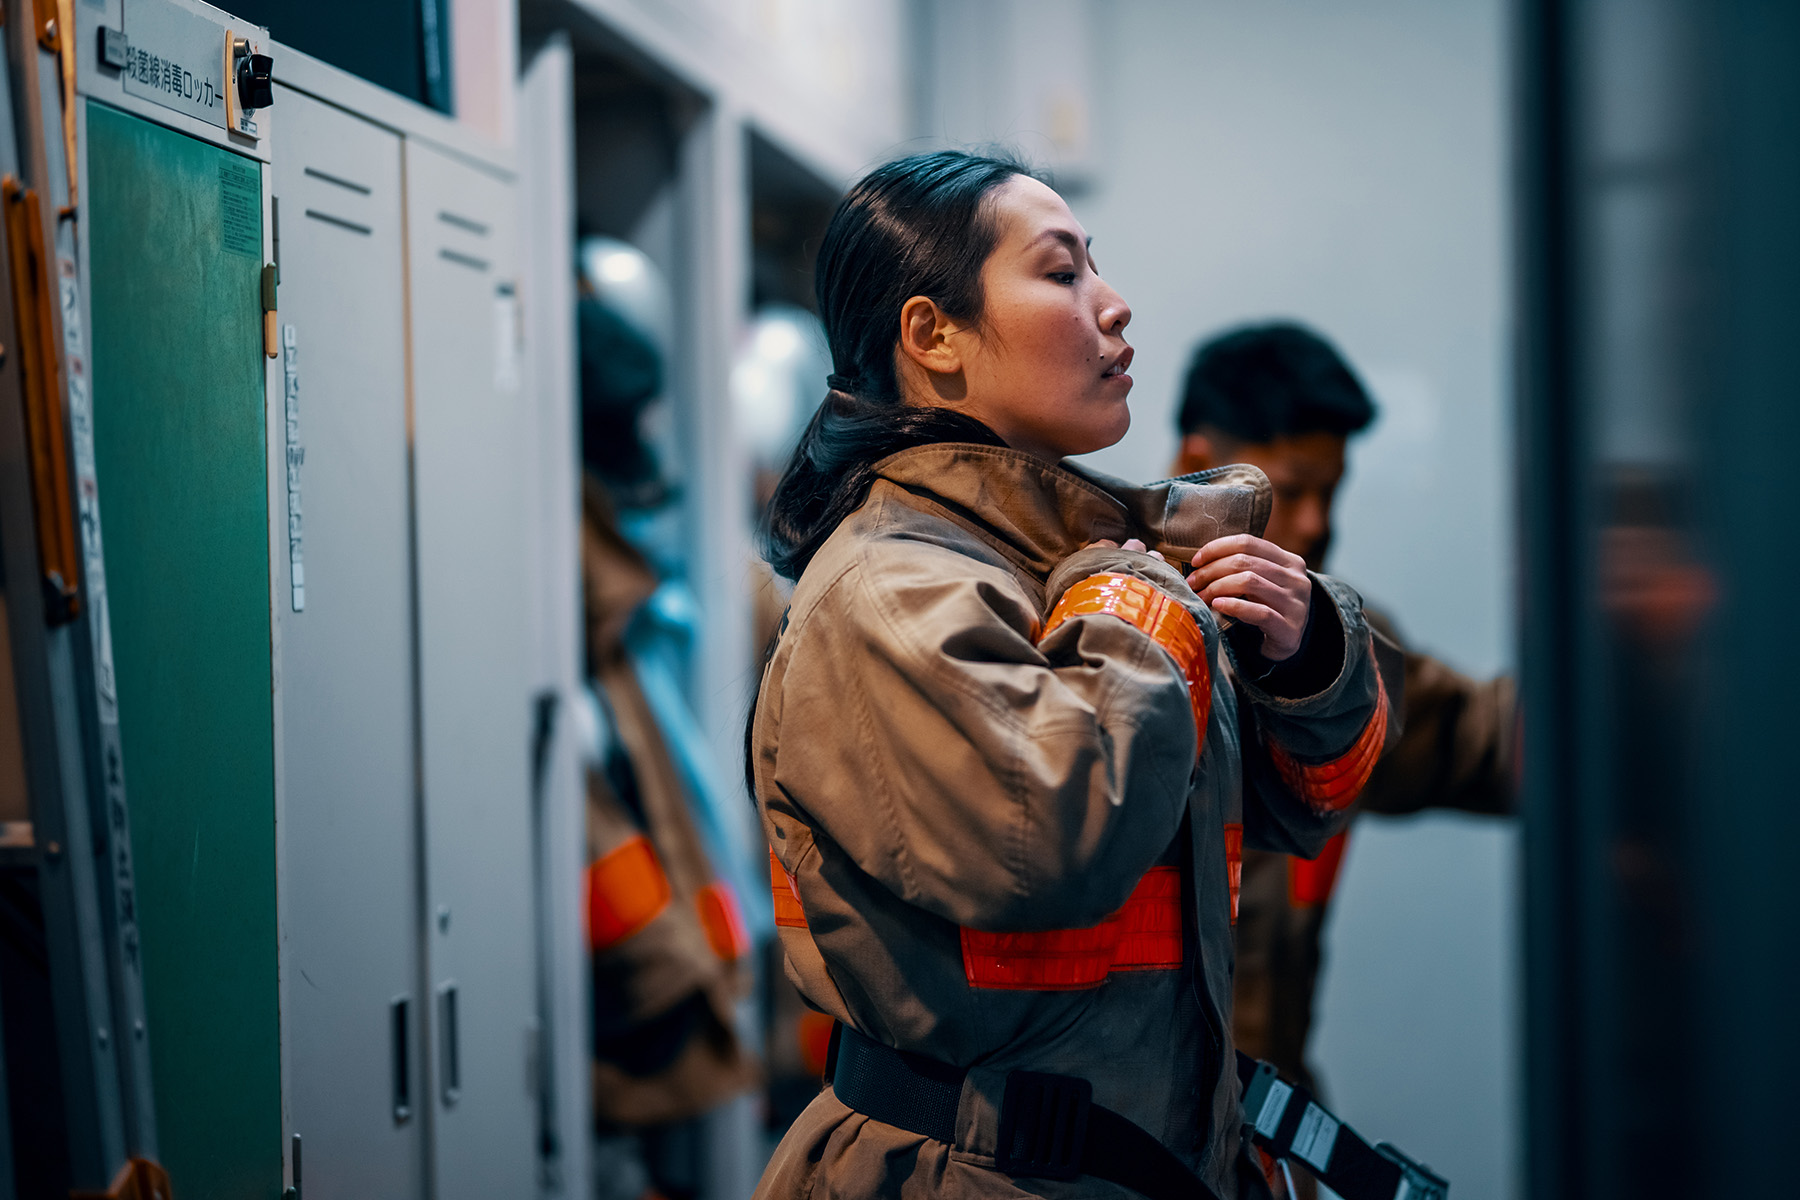 Female firefighter putting on her protective equipment at the fire station in response to an emergency.

